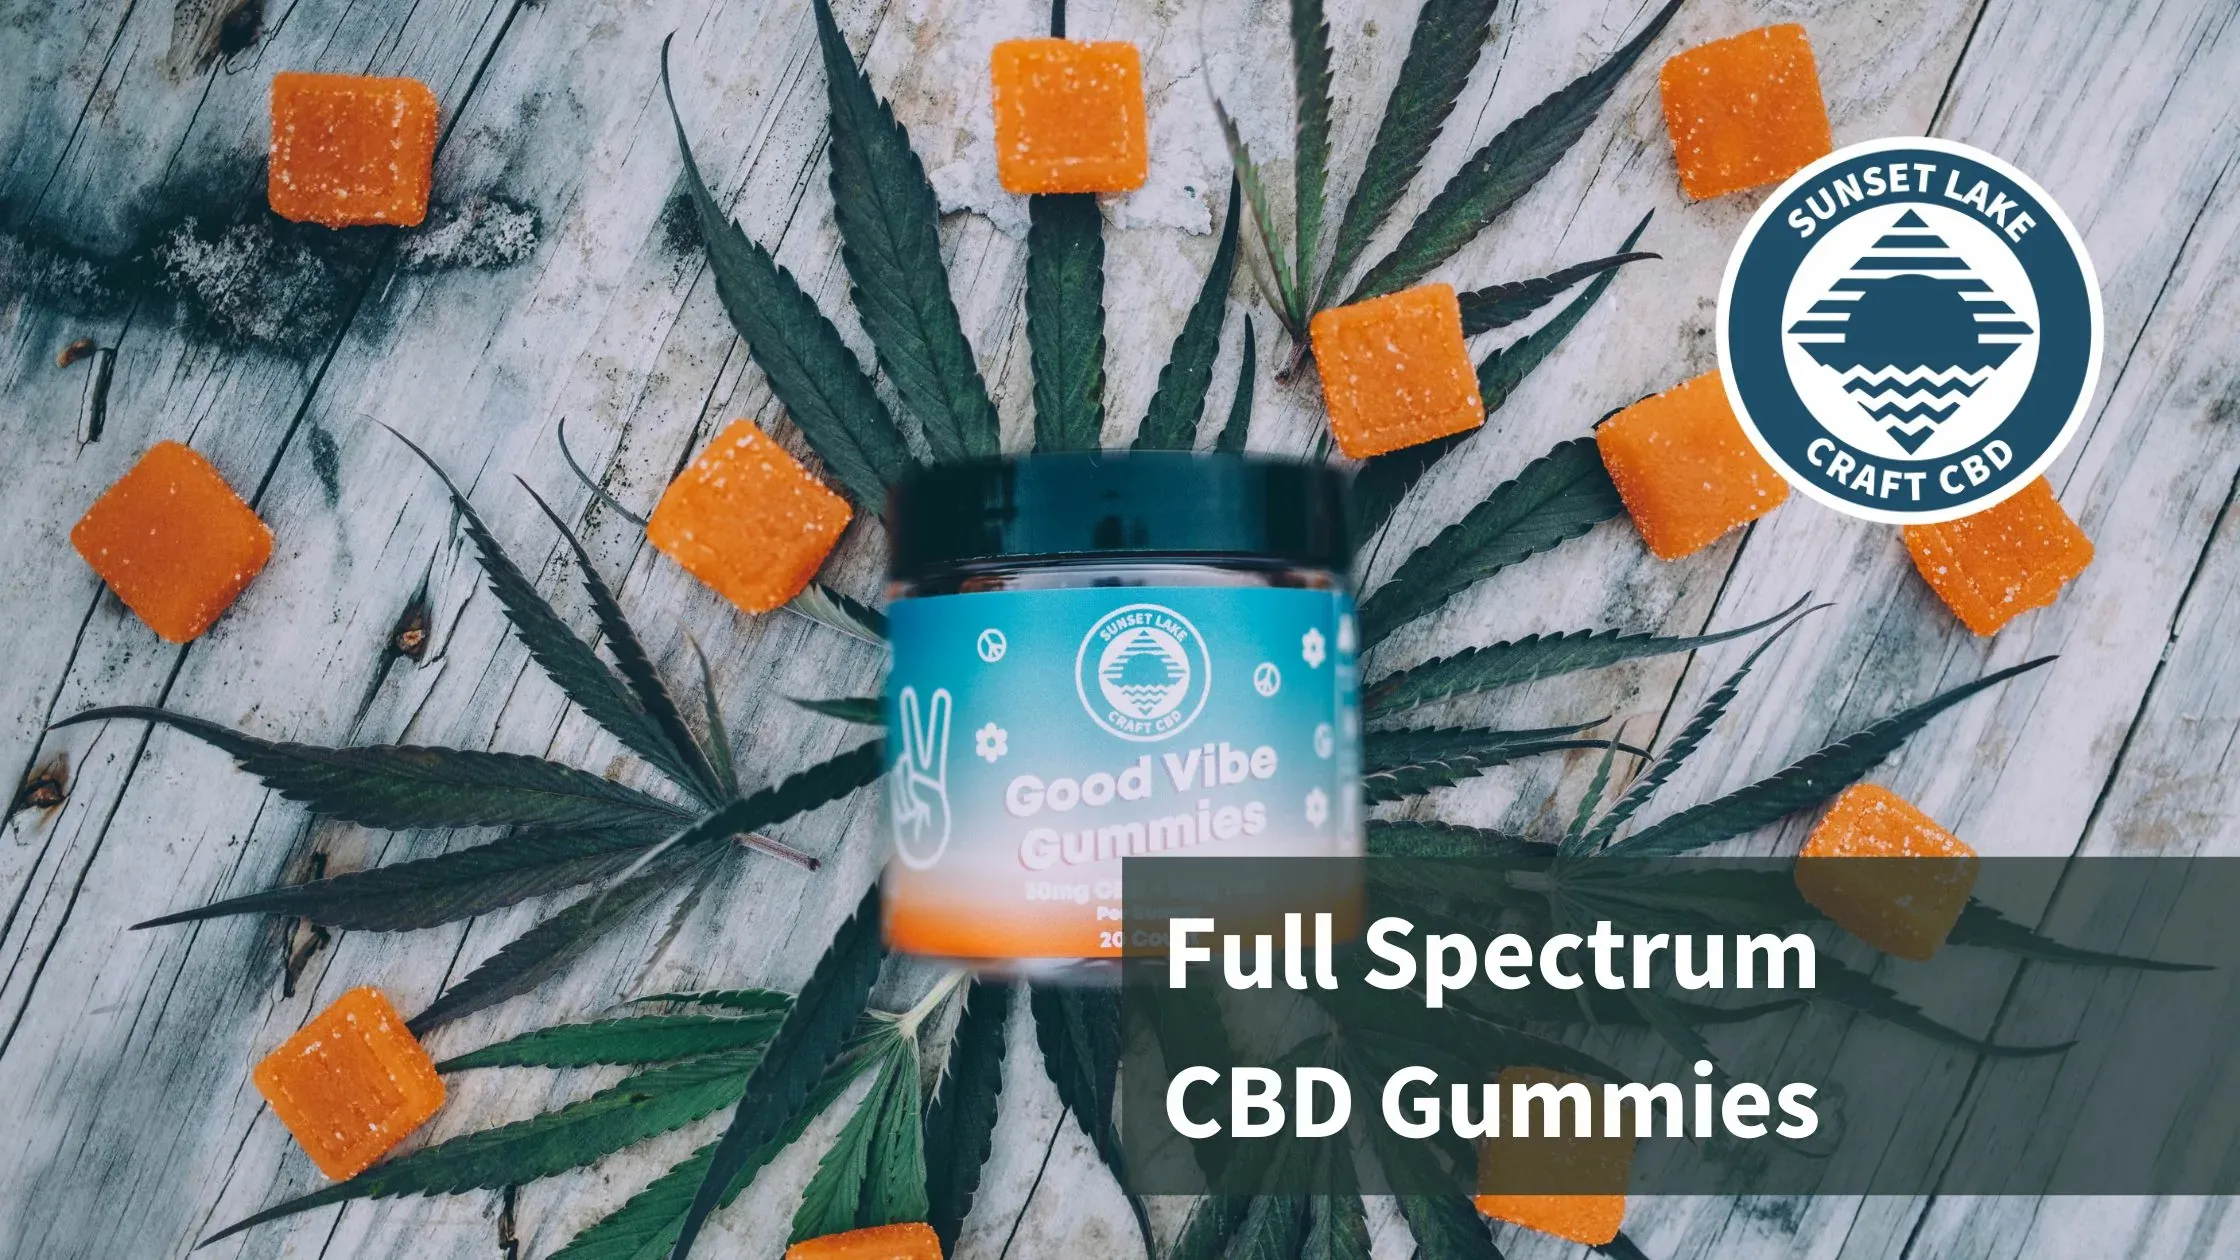 What Makes Full-Spectrum Gummies Different From Other CBD Gummies?